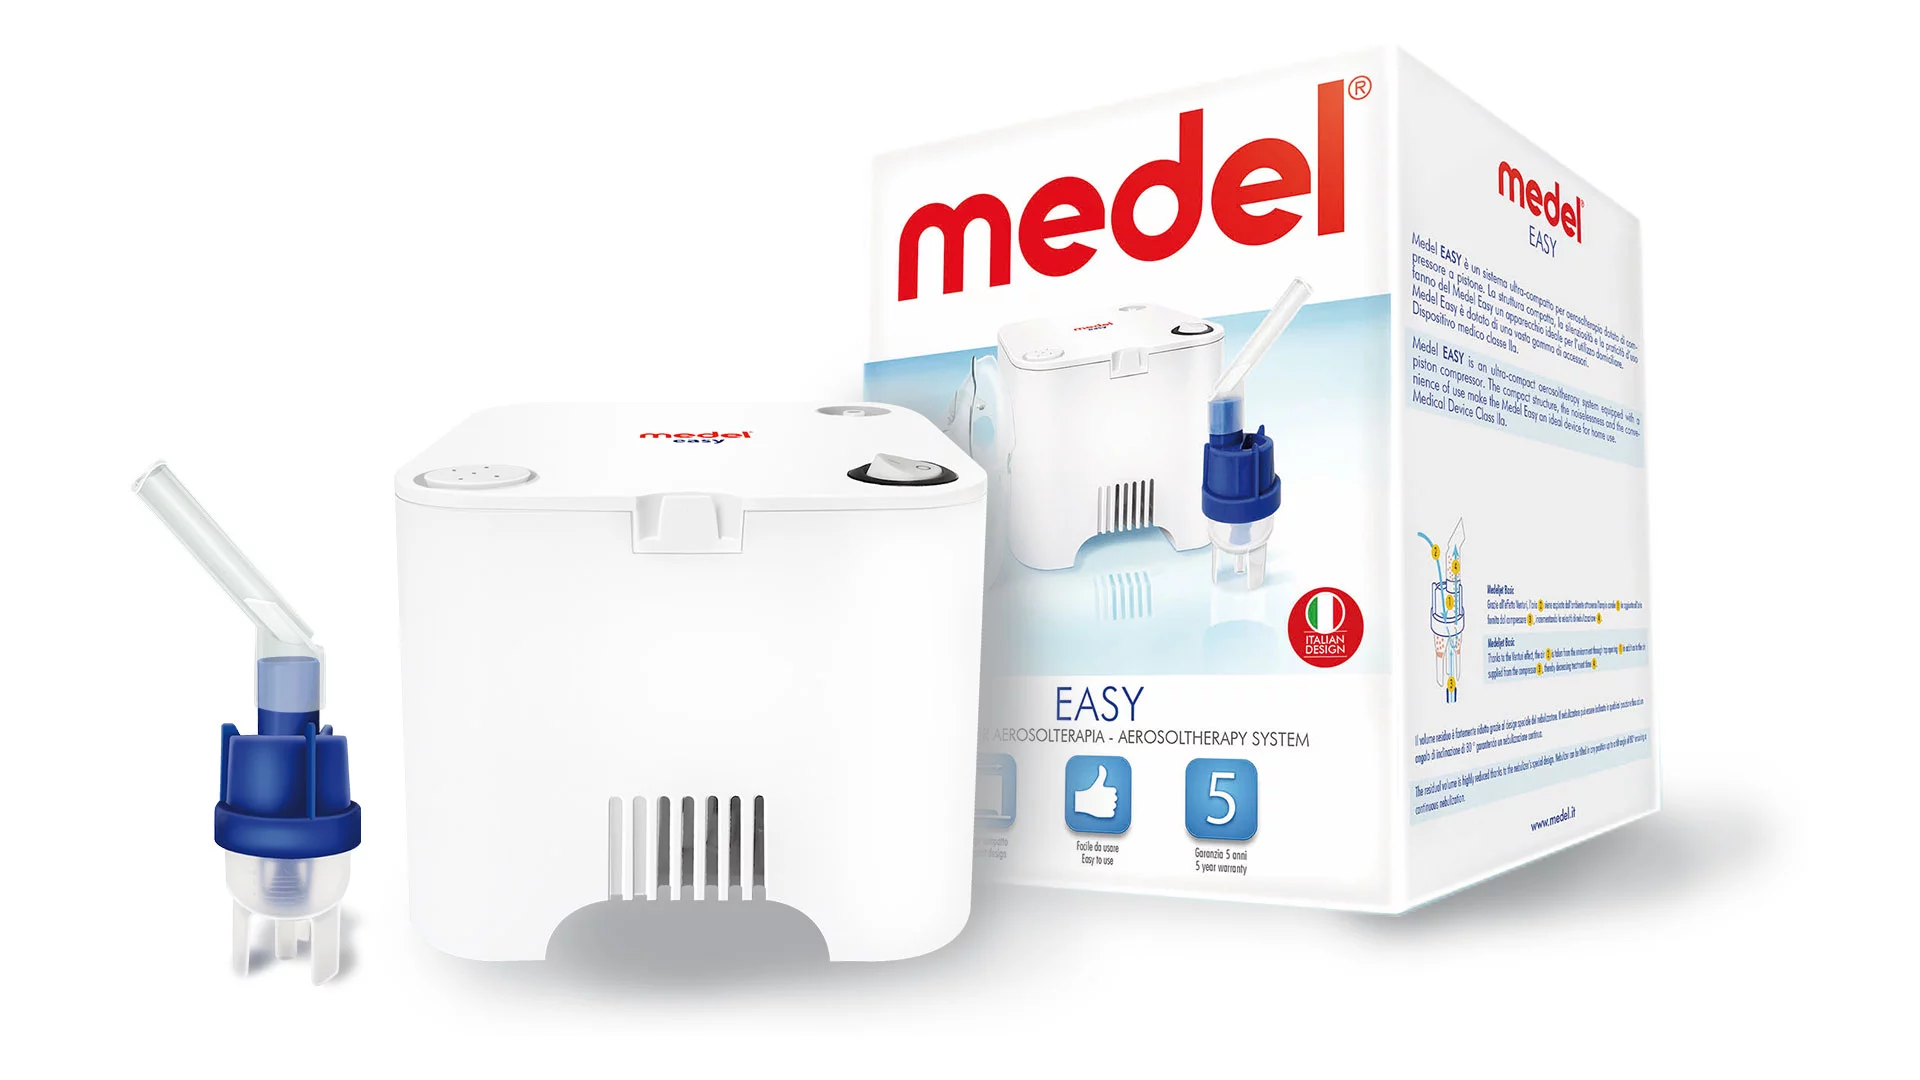 Nebulizer Medel Easy for the whole family 95116, with Compact Design